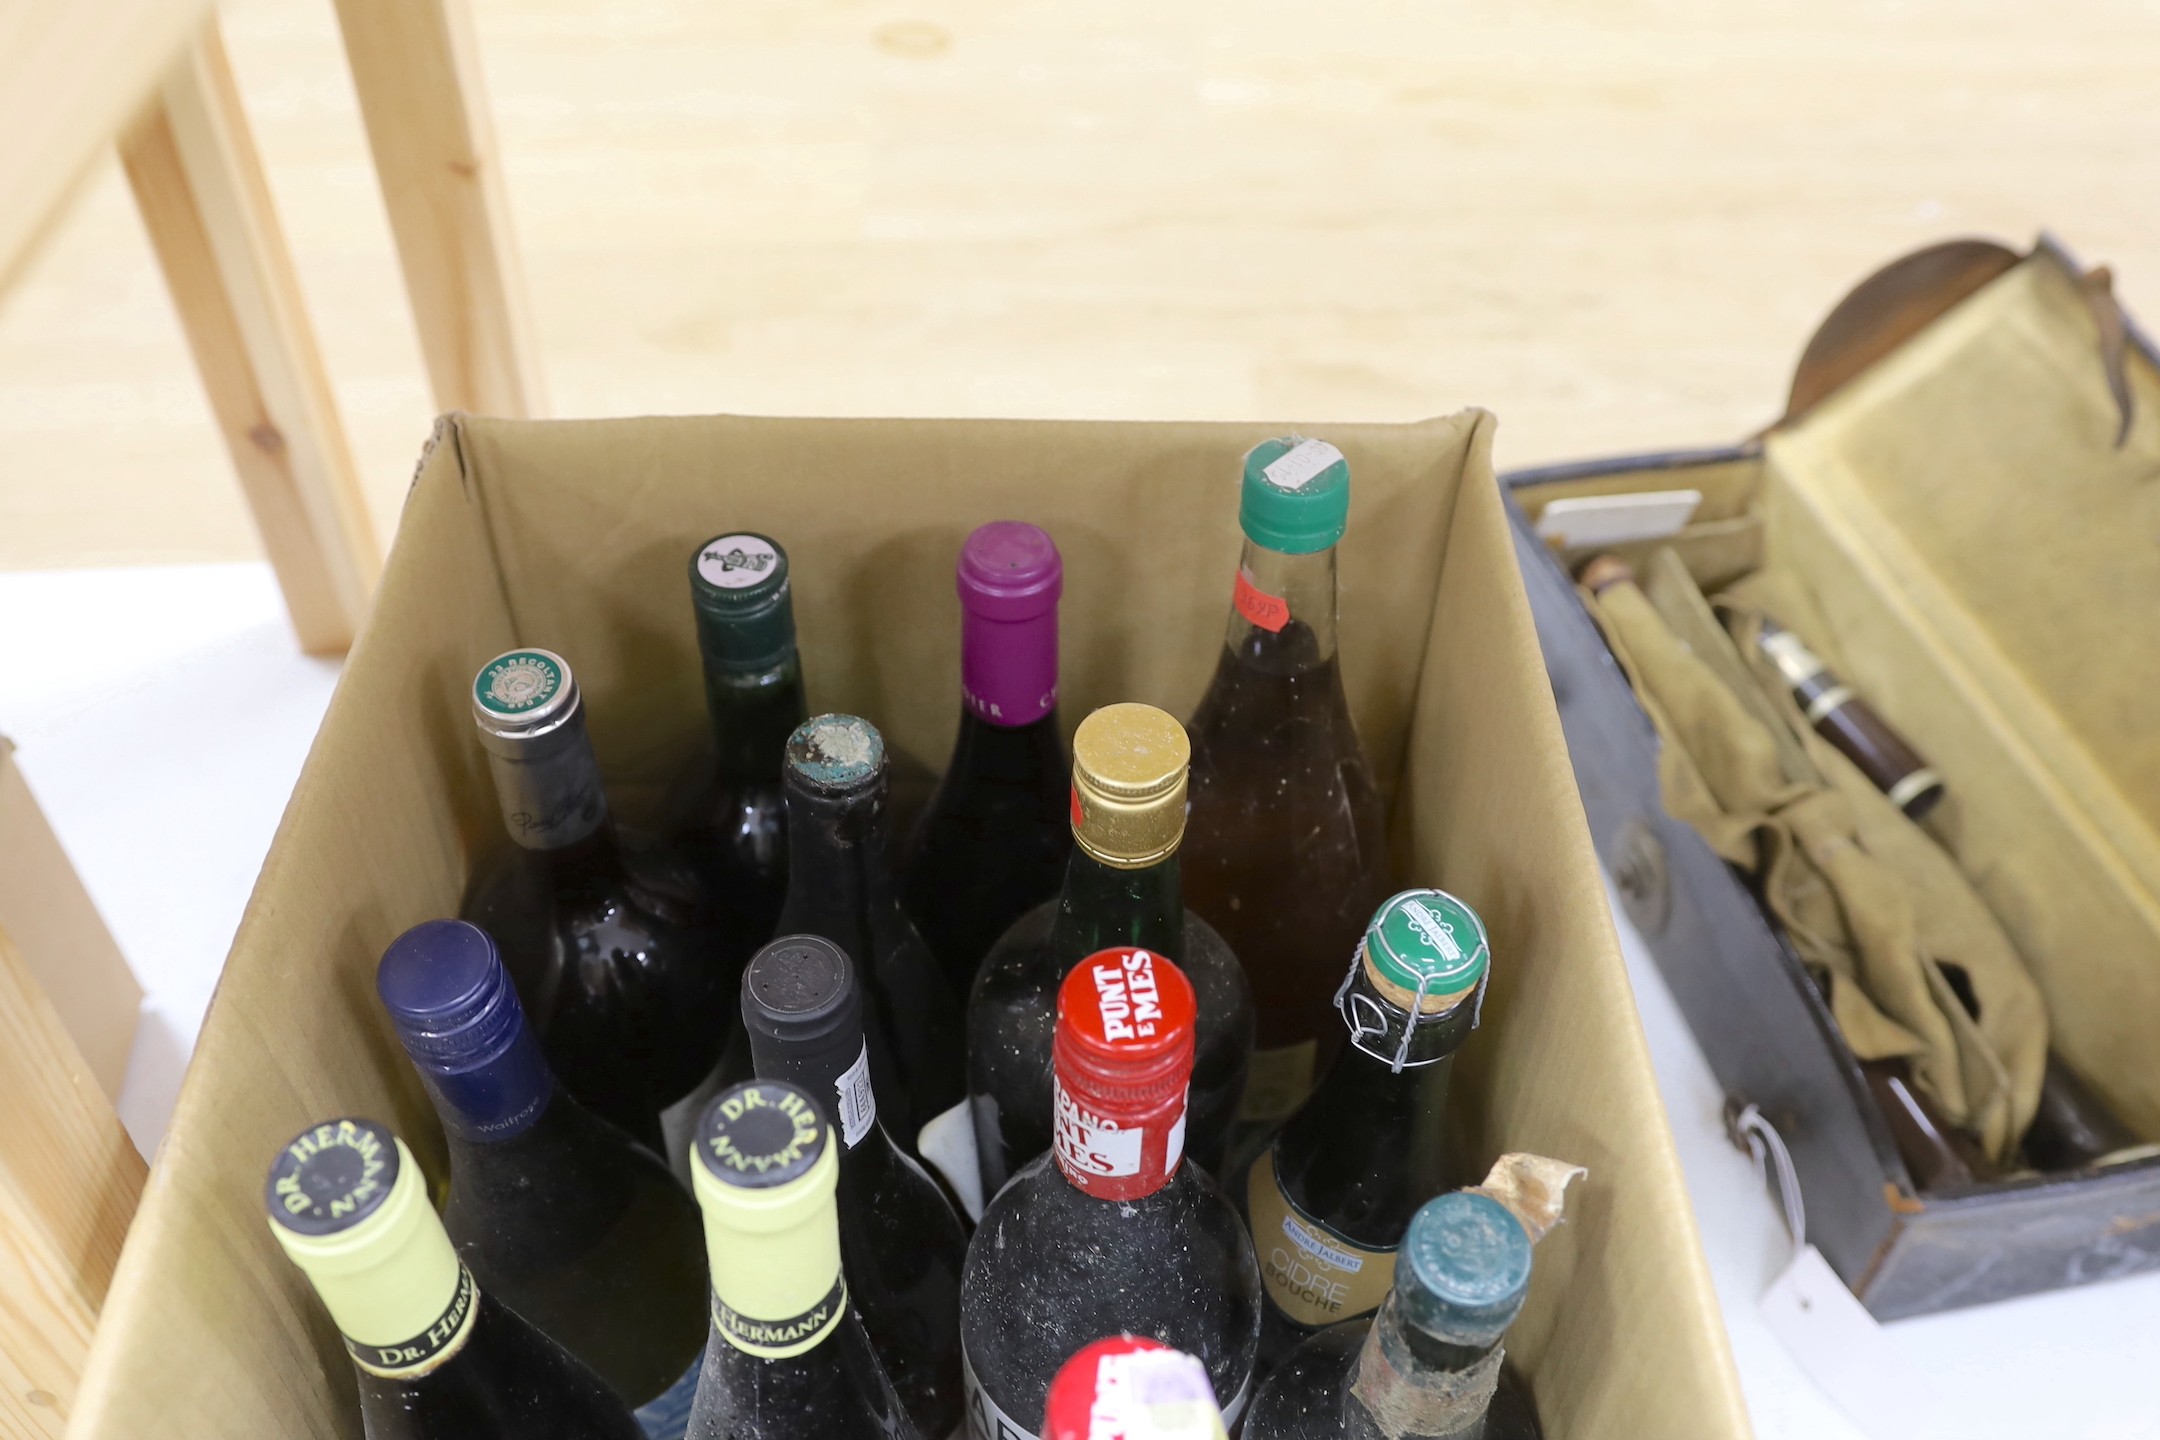 40 bottles of mixed wines and spirits